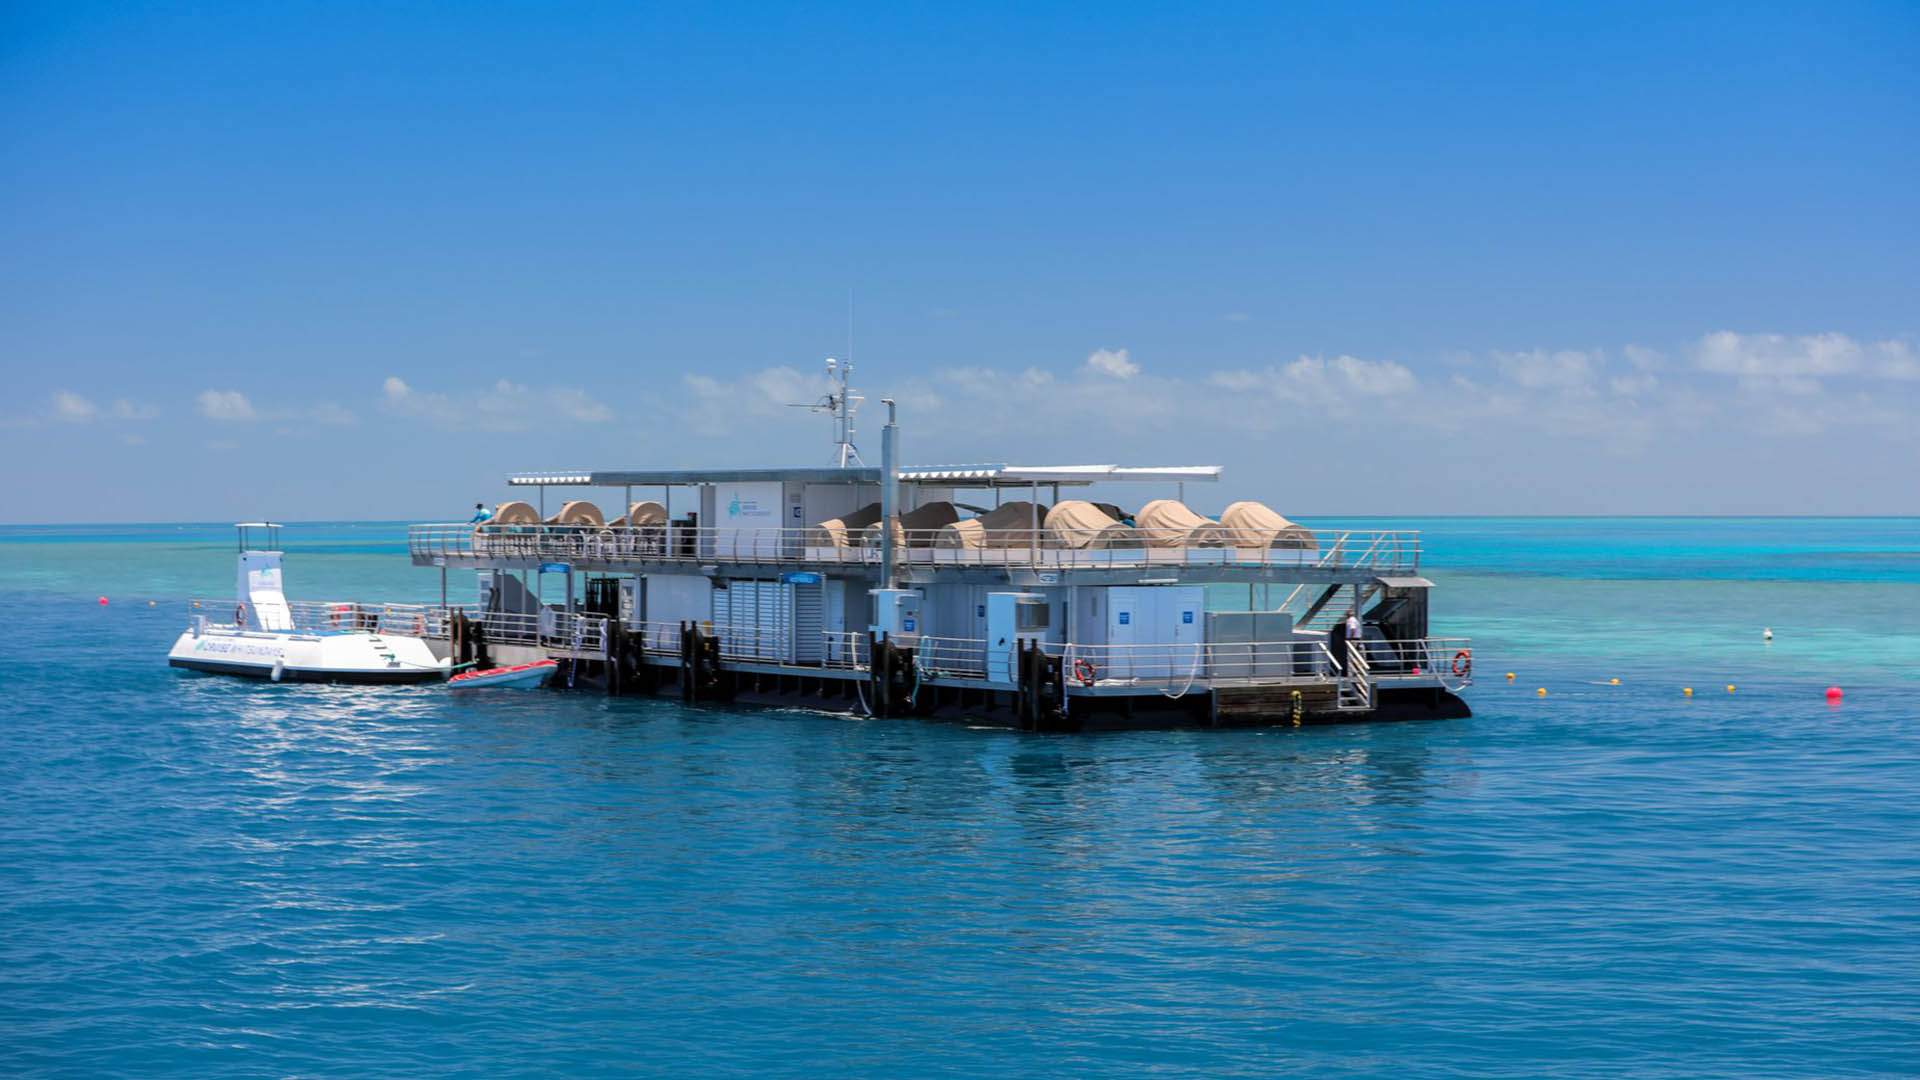 The Great Barrier Reef Is Now Home to Australia's First Underwater Hotel